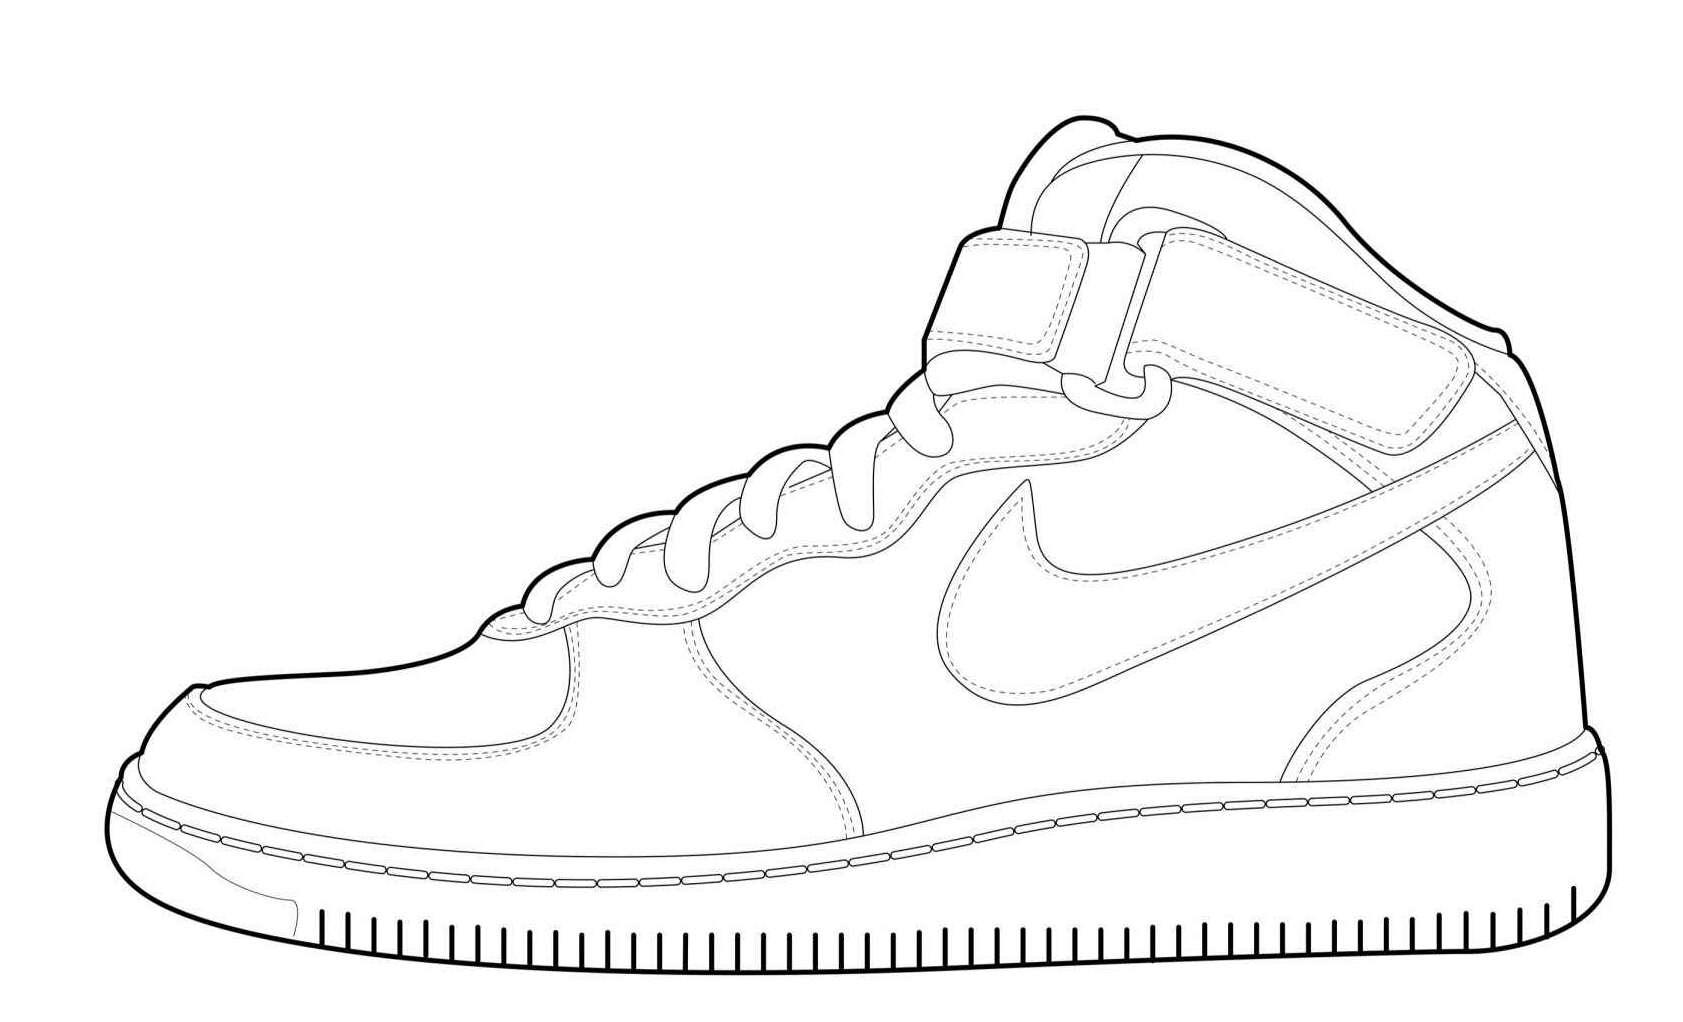 Top 53 Hunky-dory Nike Air Jordan Shoes Coloring Page Pages ...